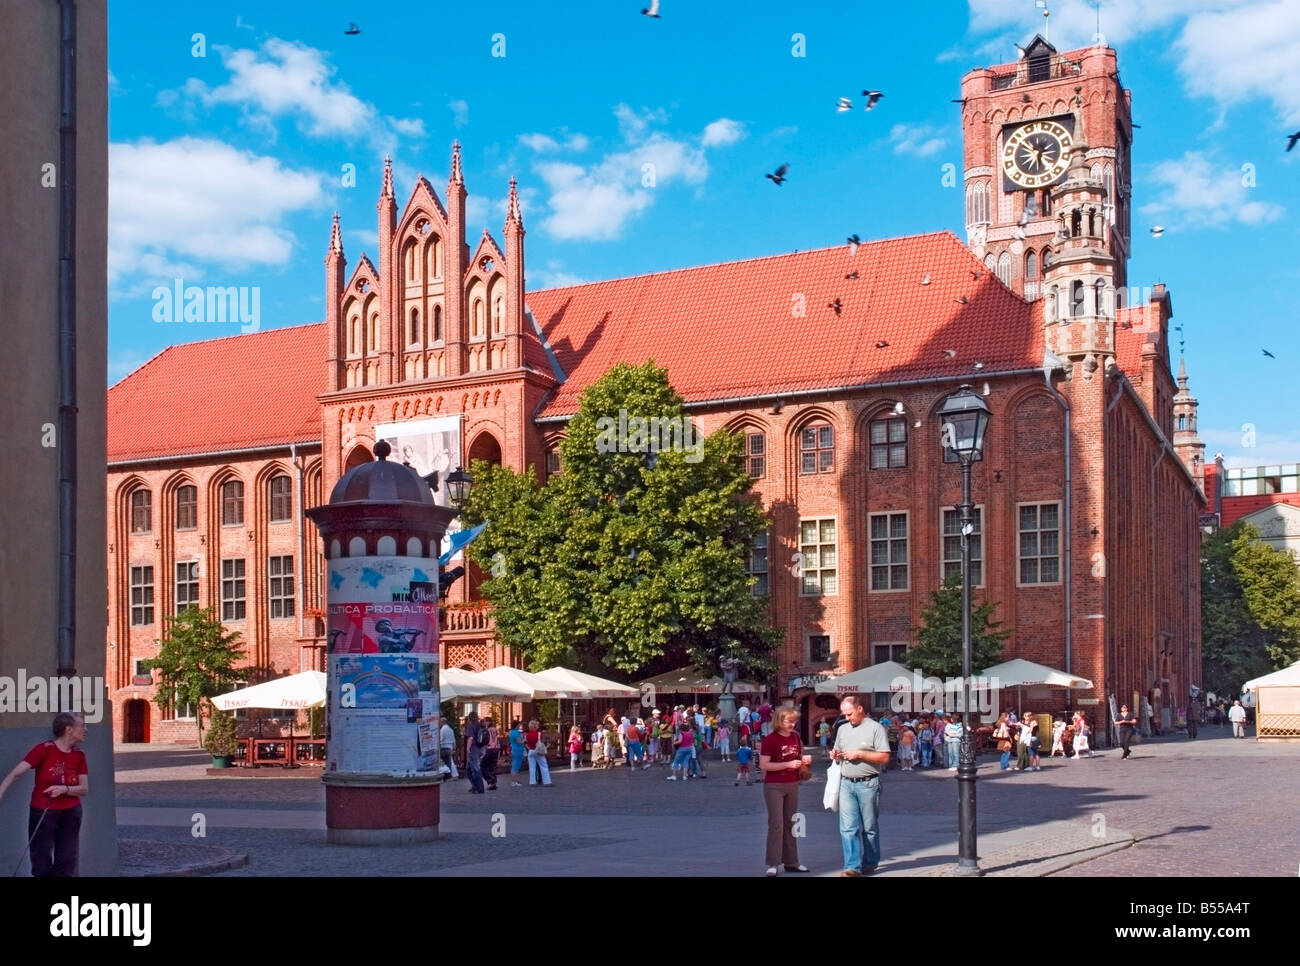 The medieval Old Town Hall (Ratusz) in the market square (Rynek), Torun, Poland, which is now a museum. Stock Photo